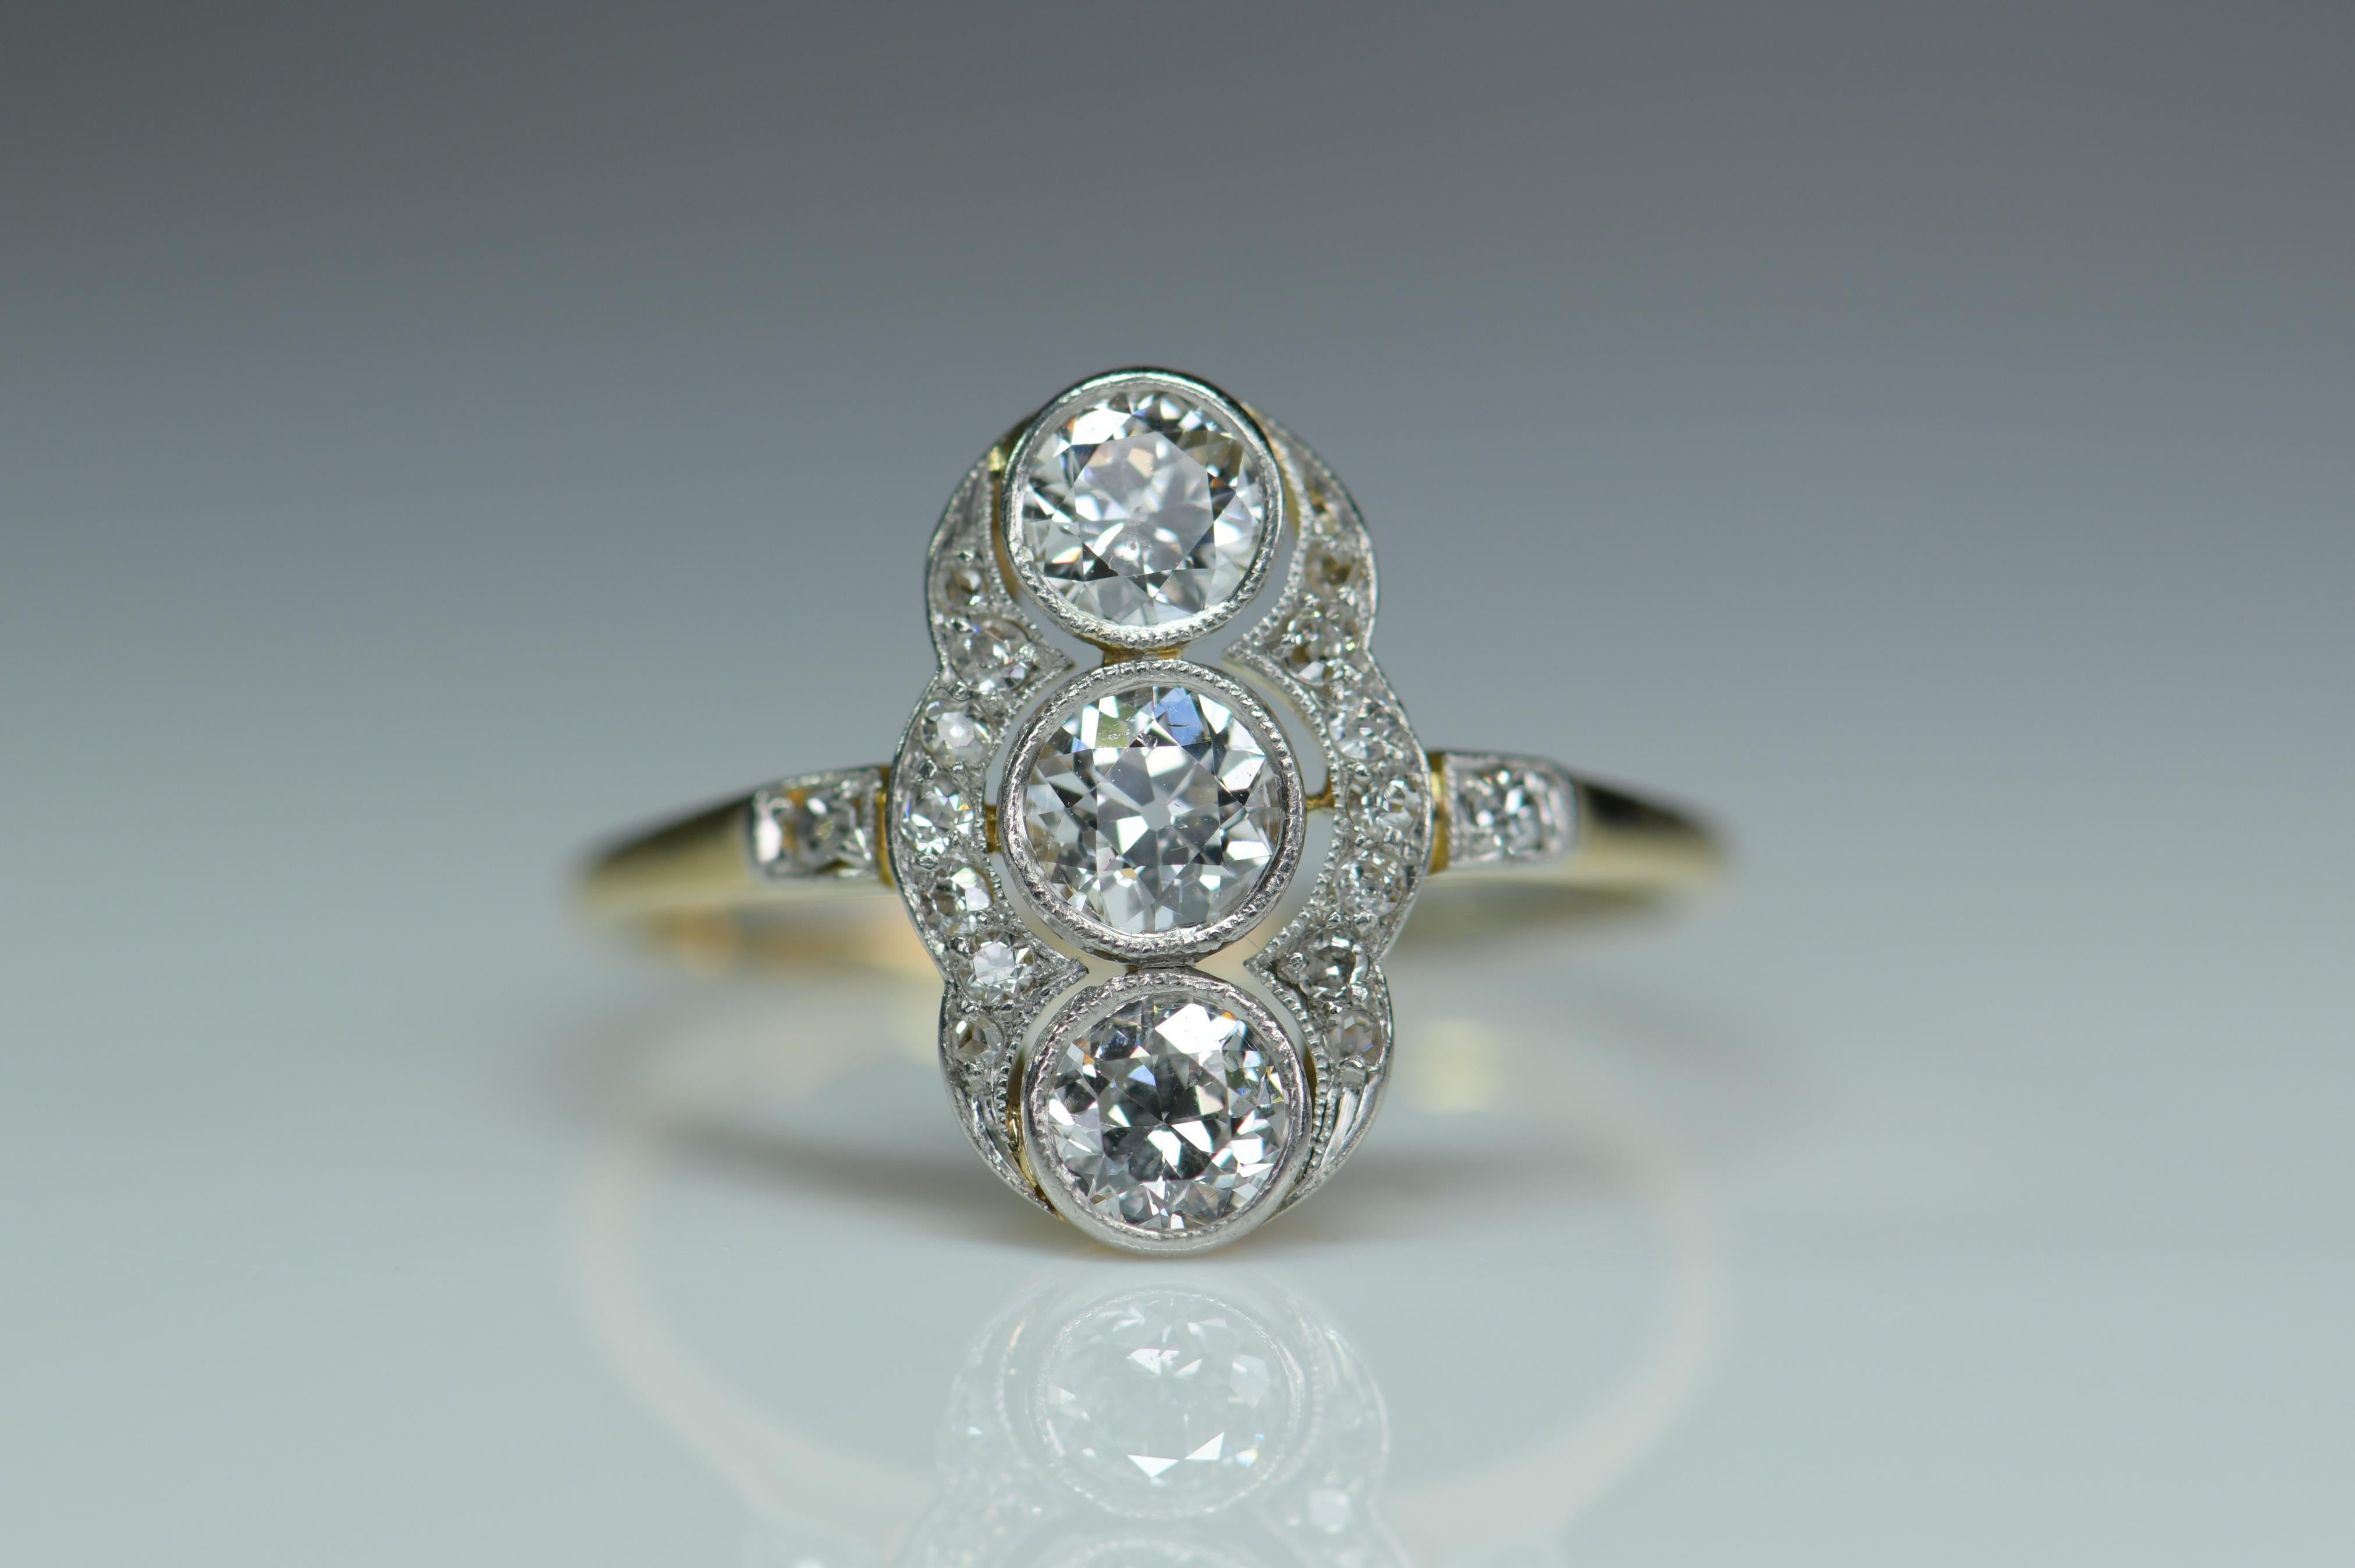 A wonderful platinum ring that is typical of the Art Deco period with it’s striking design. It is a pleasing oval shape that is very flattering to the finger when worn. Down the center are set three well matched white diamonds in open settings.